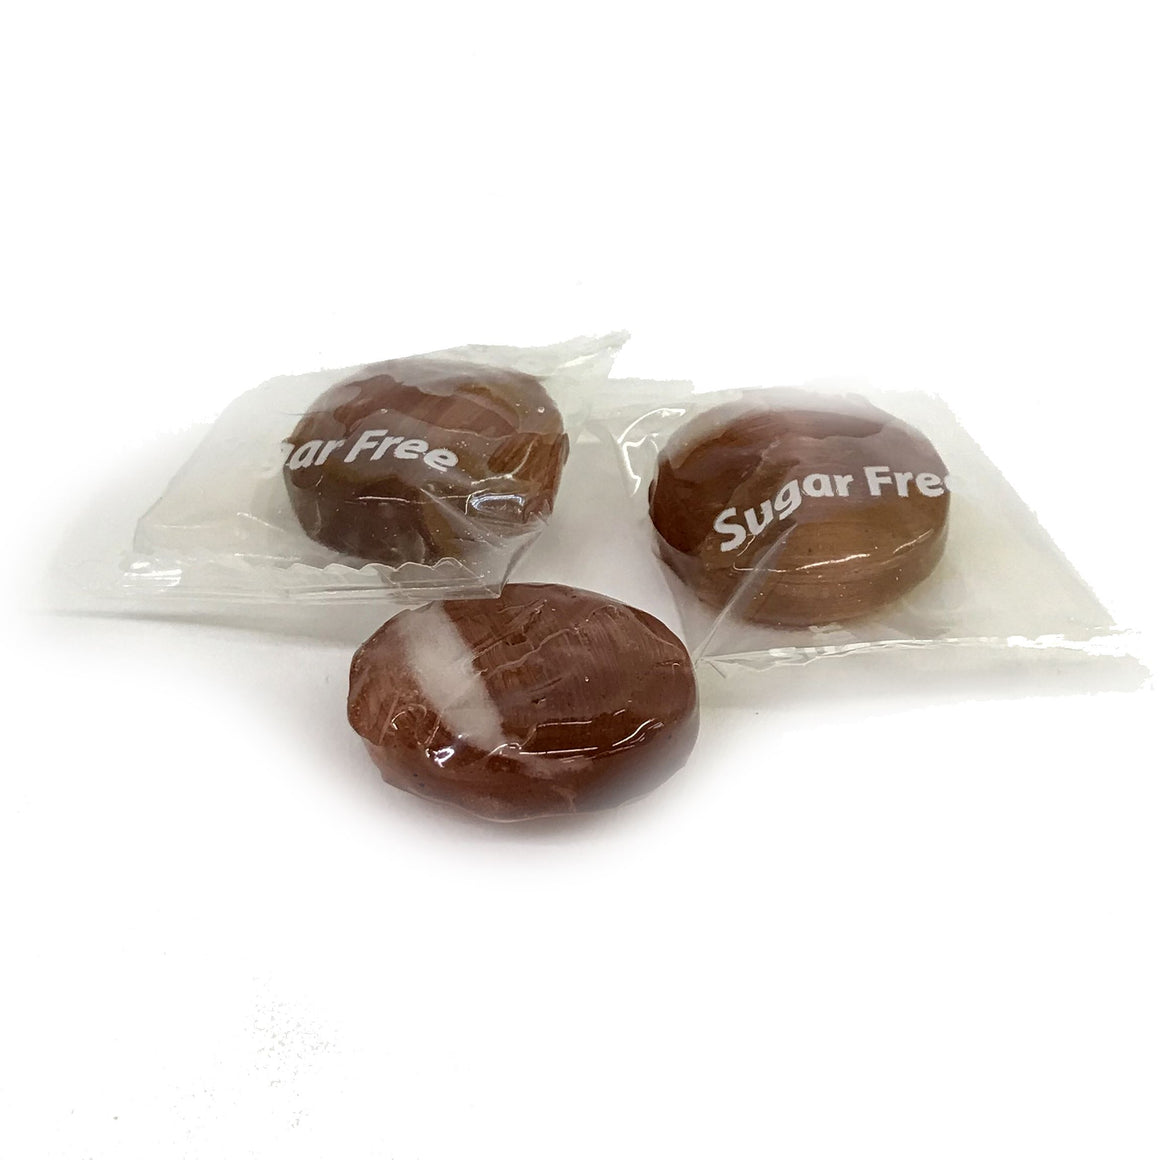 All City Candy Atkinson's Sugar Free Root Beer Buttons Hard Candy - 2 LB Bulk Bag Bulk Wrapped Atkinson's Candy For fresh candy and great service, visit www.allcitycandy.com